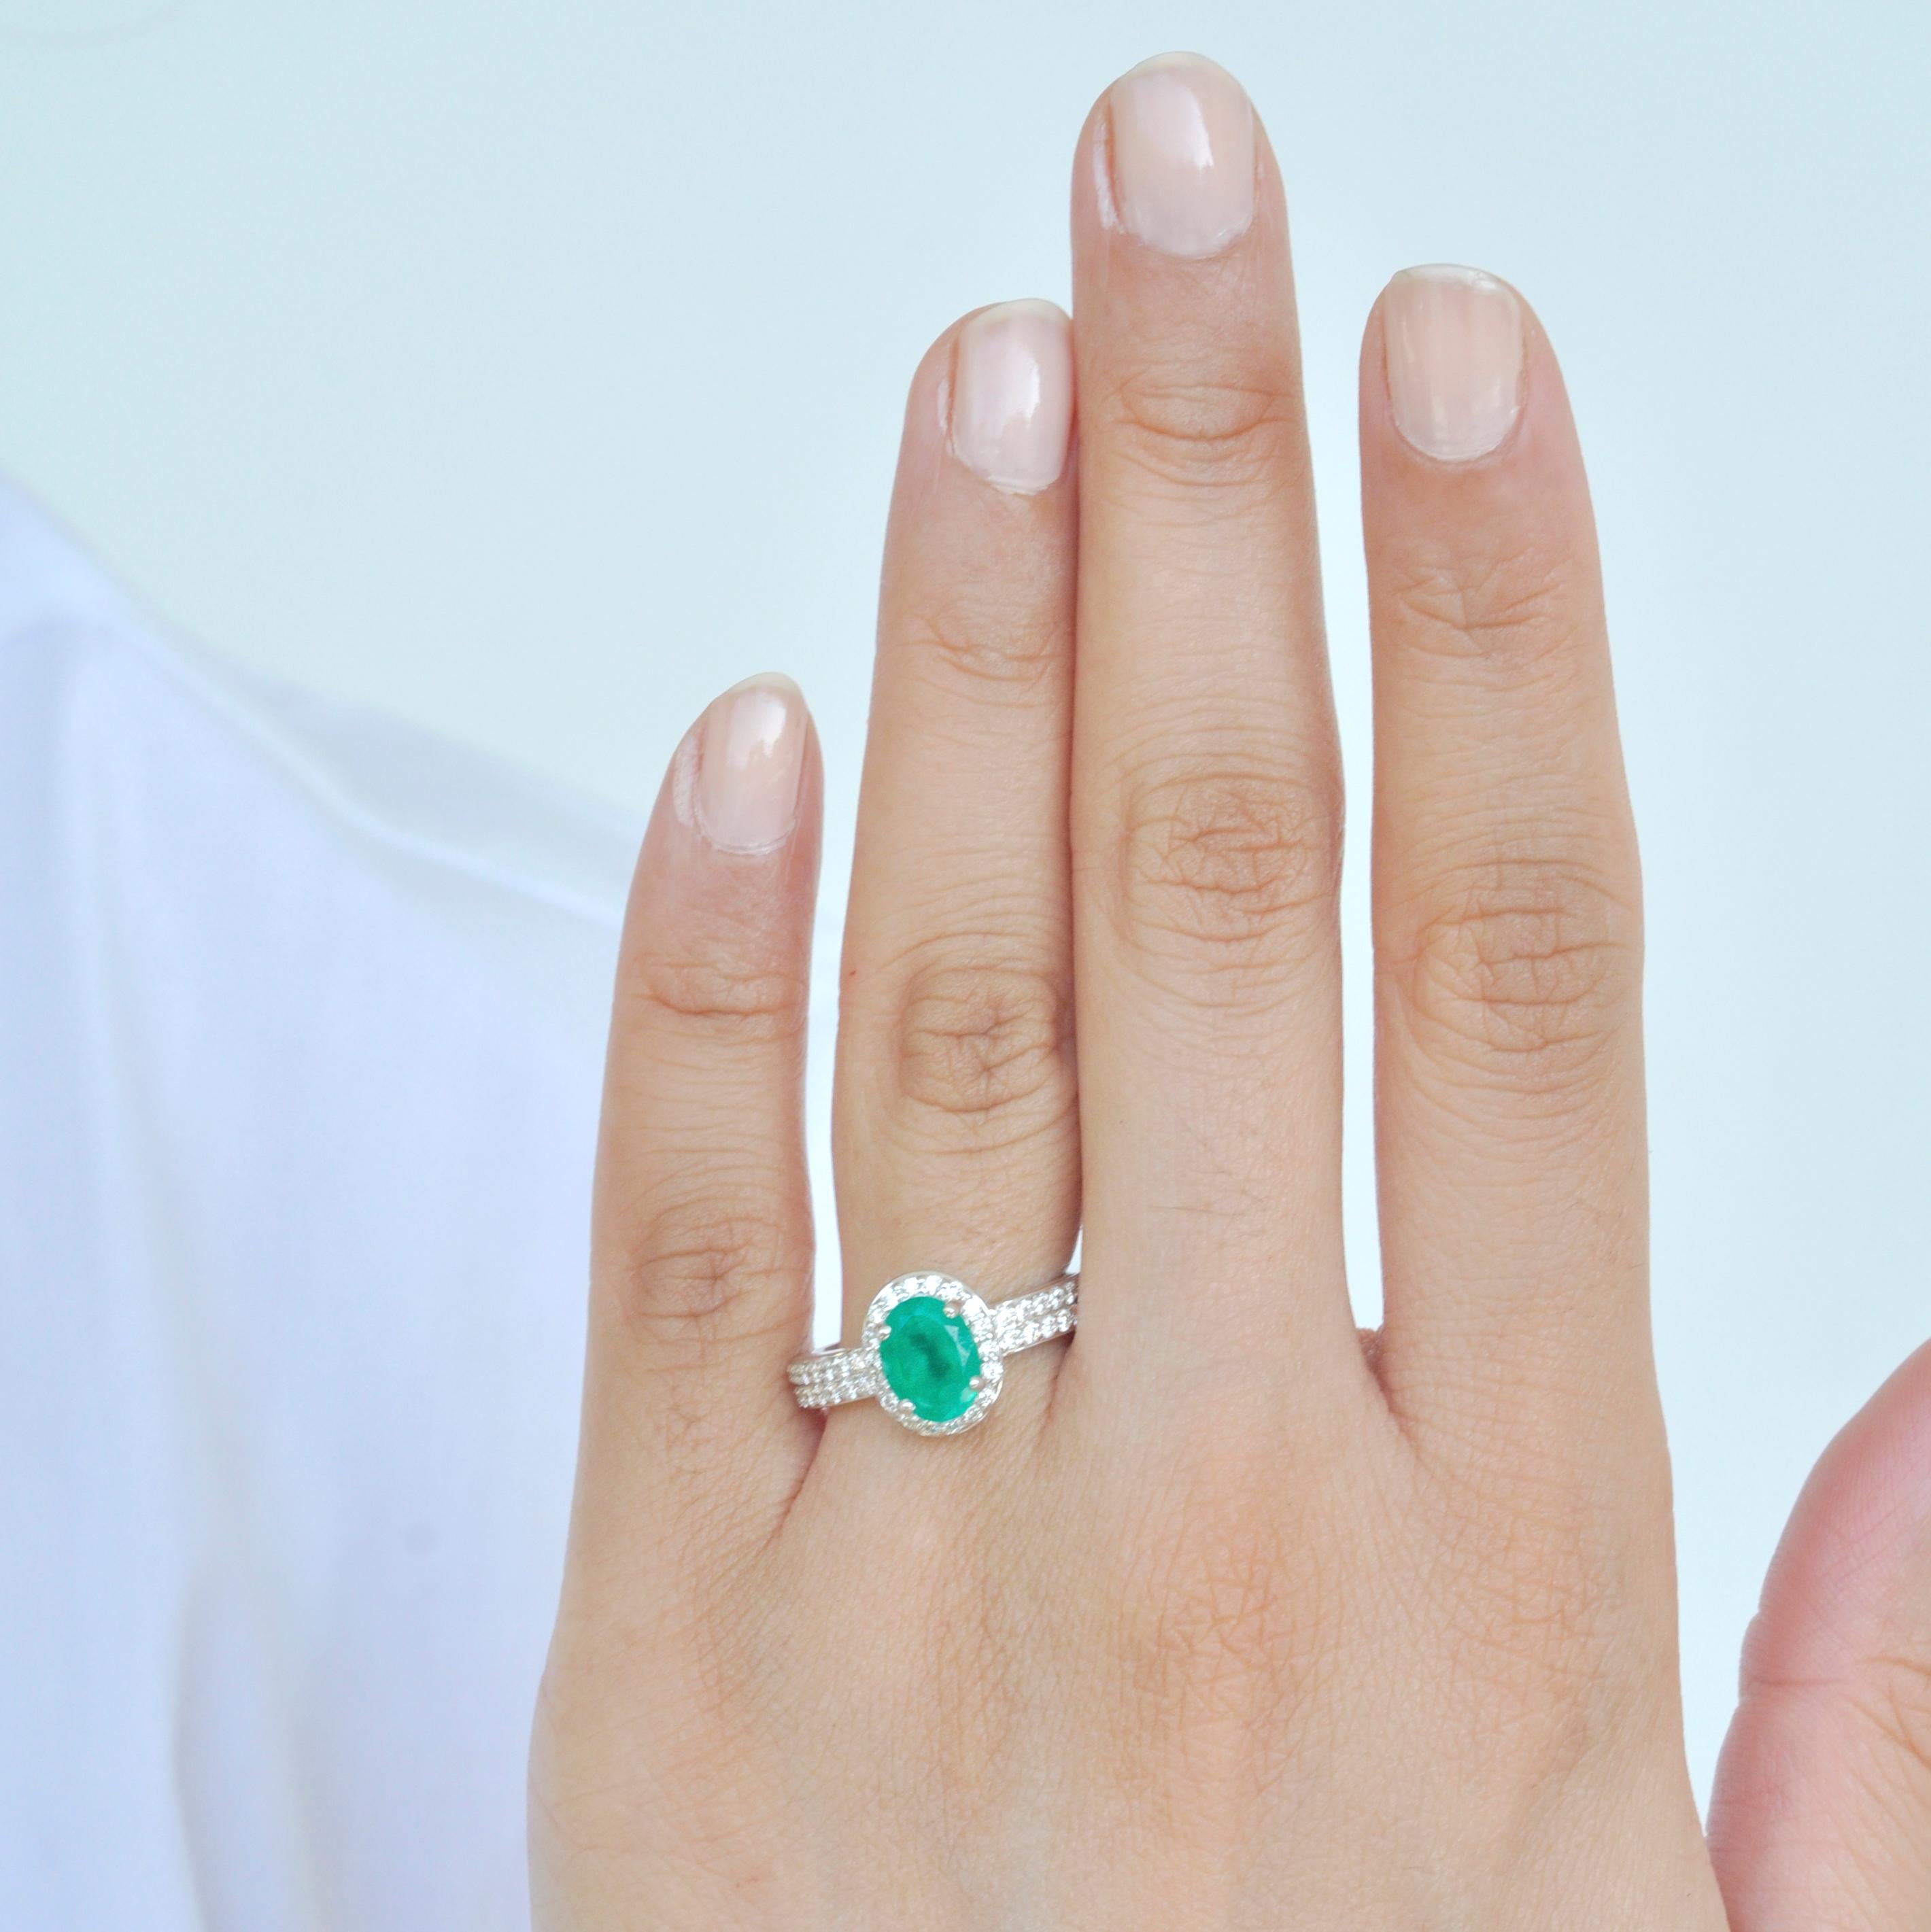 18 Karat White Gold 8.4x6.4 mm Oval Colombian Emerald Diamond Contemporary Ring In New Condition For Sale In Jaipur, Rajasthan